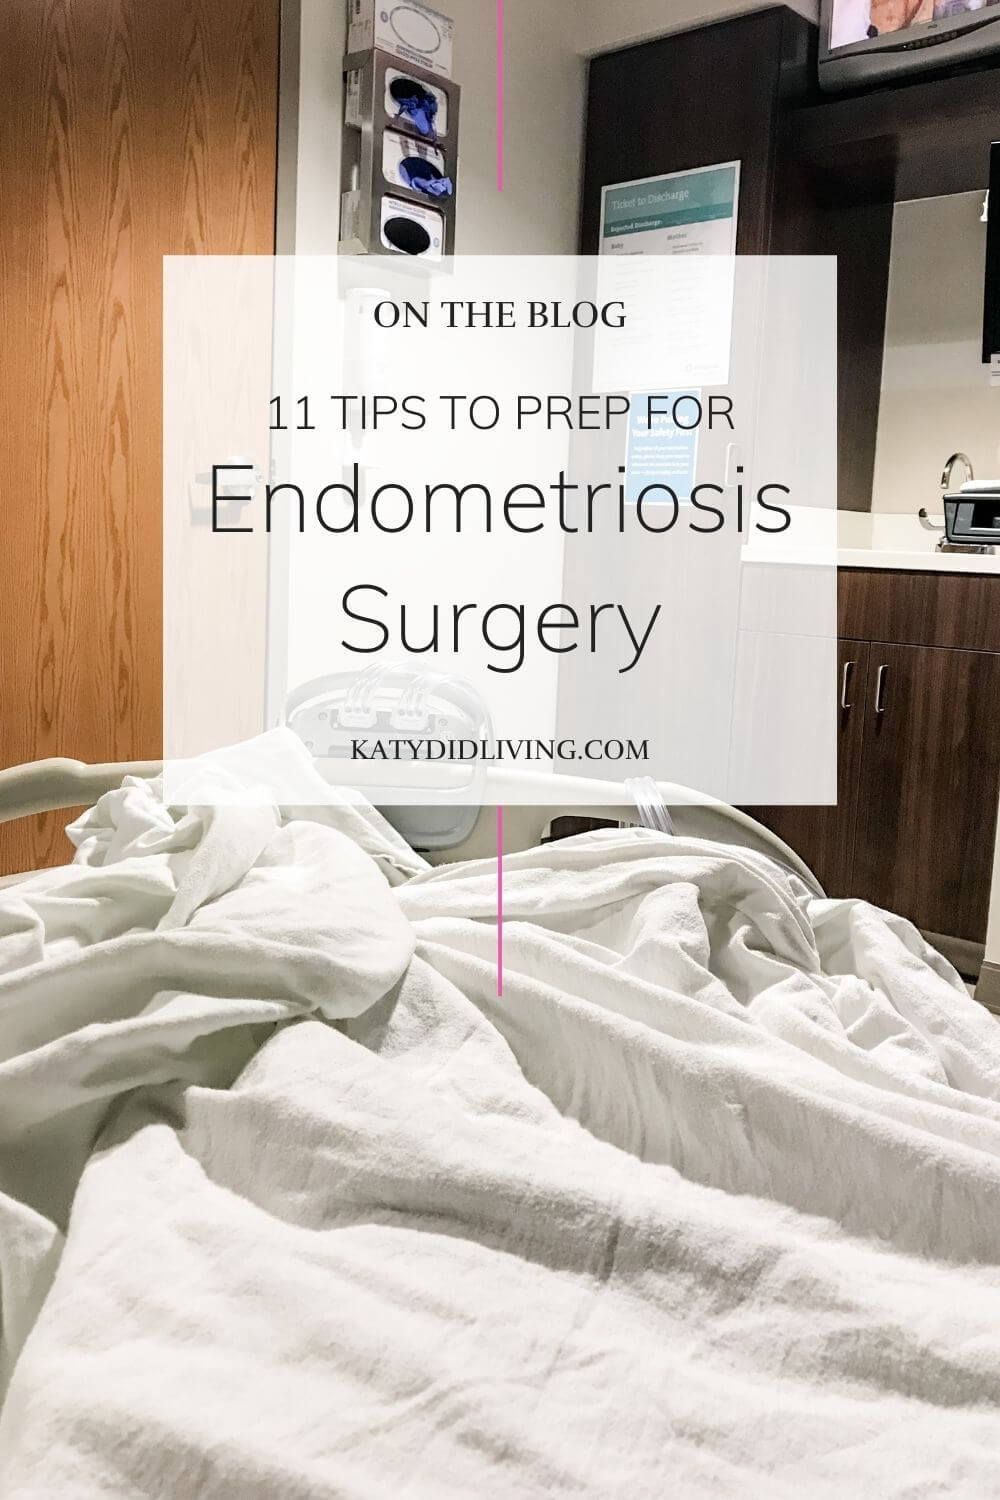 Endometriosis Removal Surgery: 11 Tips for How to Prepare HD Wallpaper